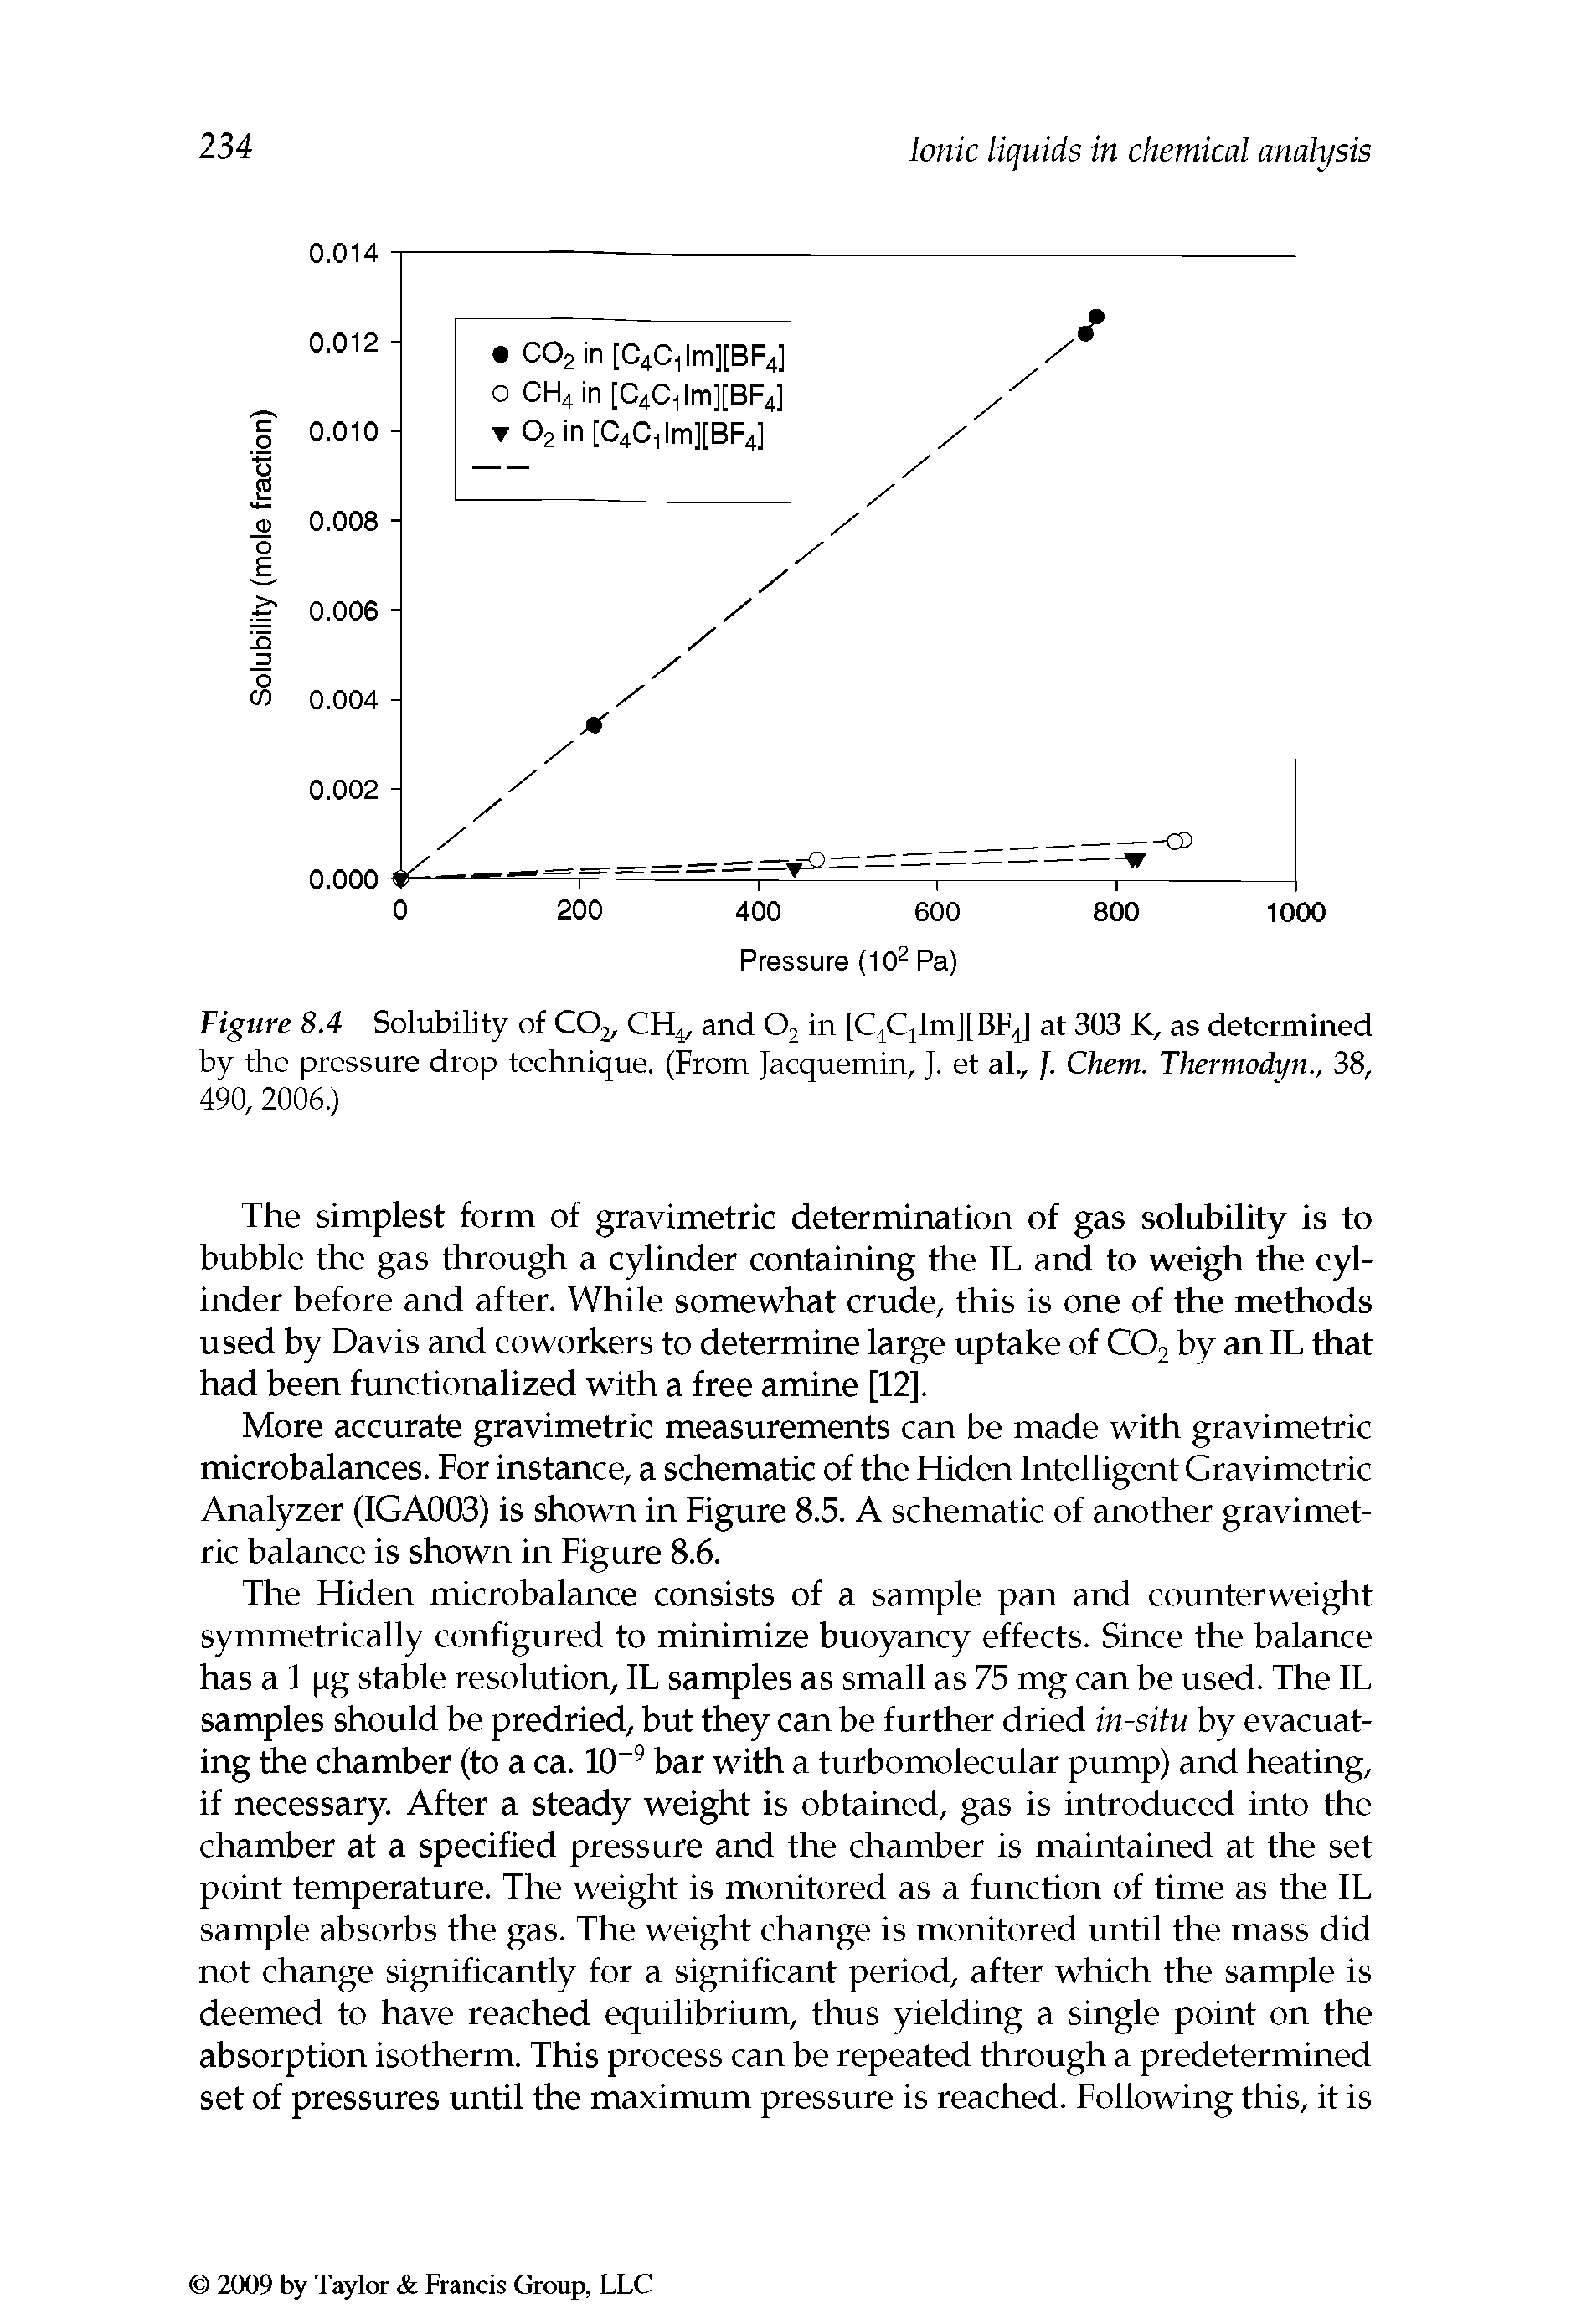 Figure 8.4 Solubility of CO2, CH4, and O2 in [C4CjIm][BF4] at 303 K, as determined by the pressure drop technique. (From Jacquemin, J. et al., J. Chem. Thermodyn., 38, 490, 2006.)...